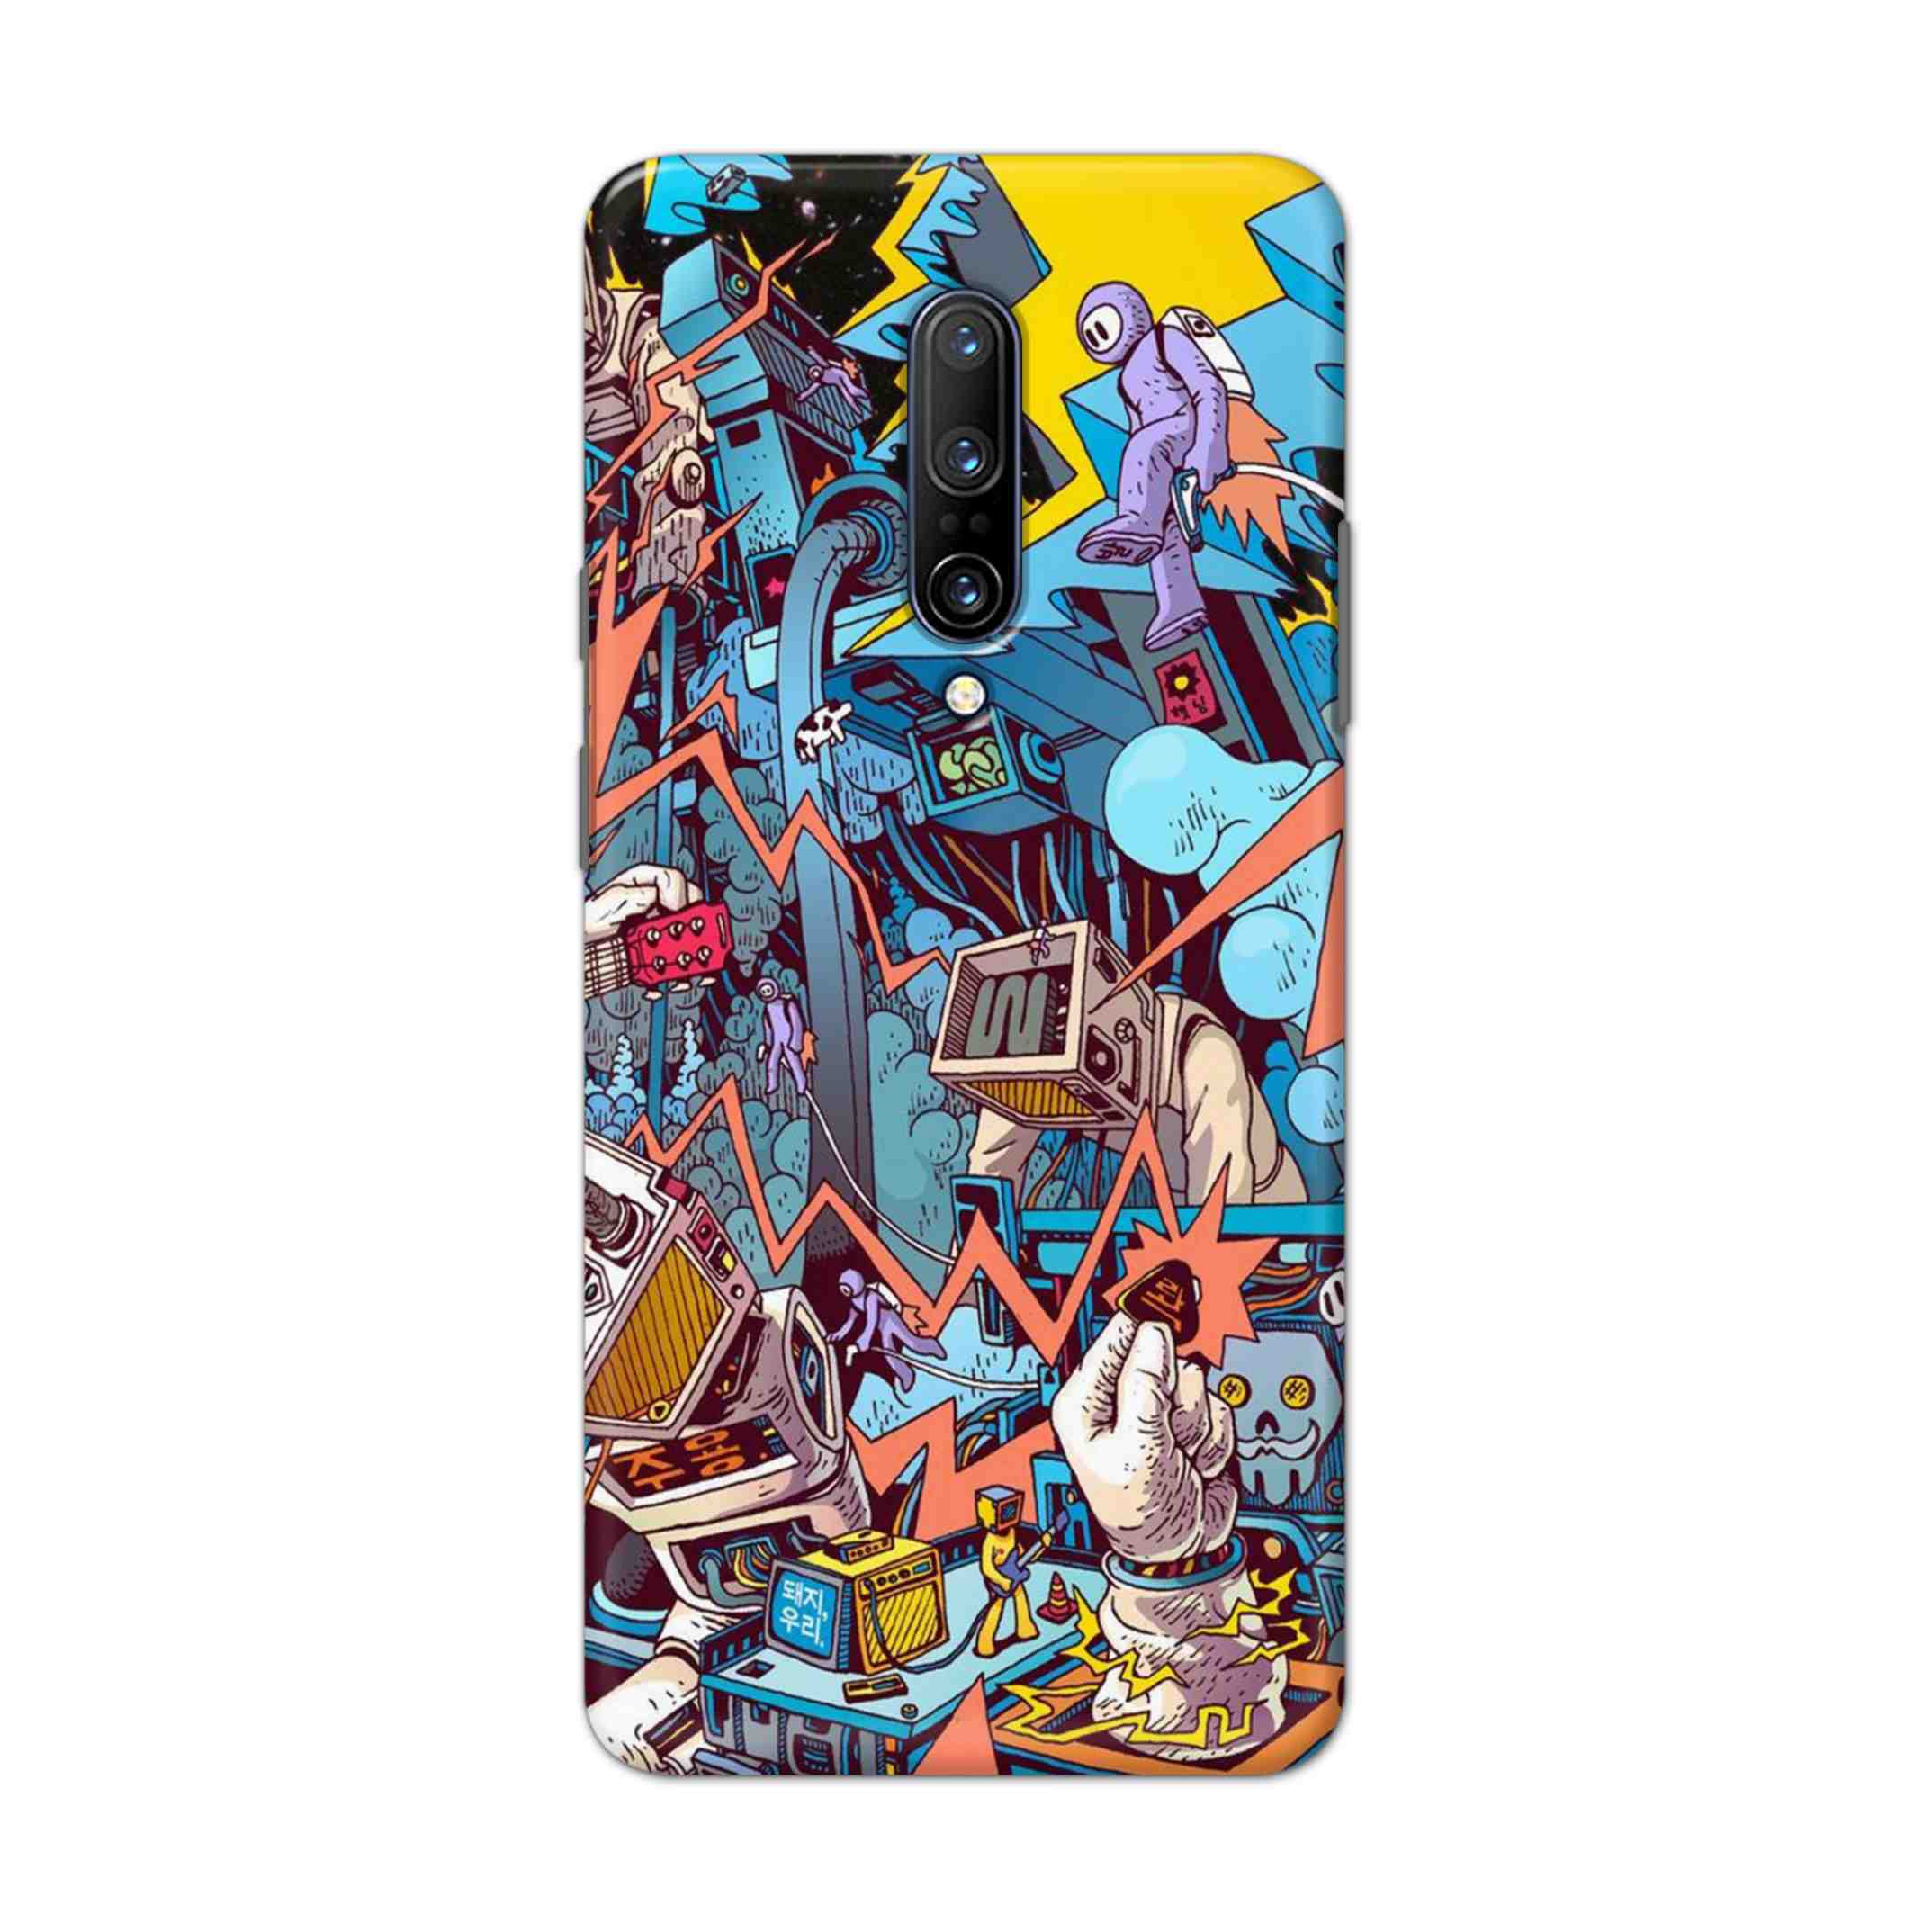 Buy Ofo Panic Hard Back Mobile Phone Case Cover For OnePlus 7 Pro Online